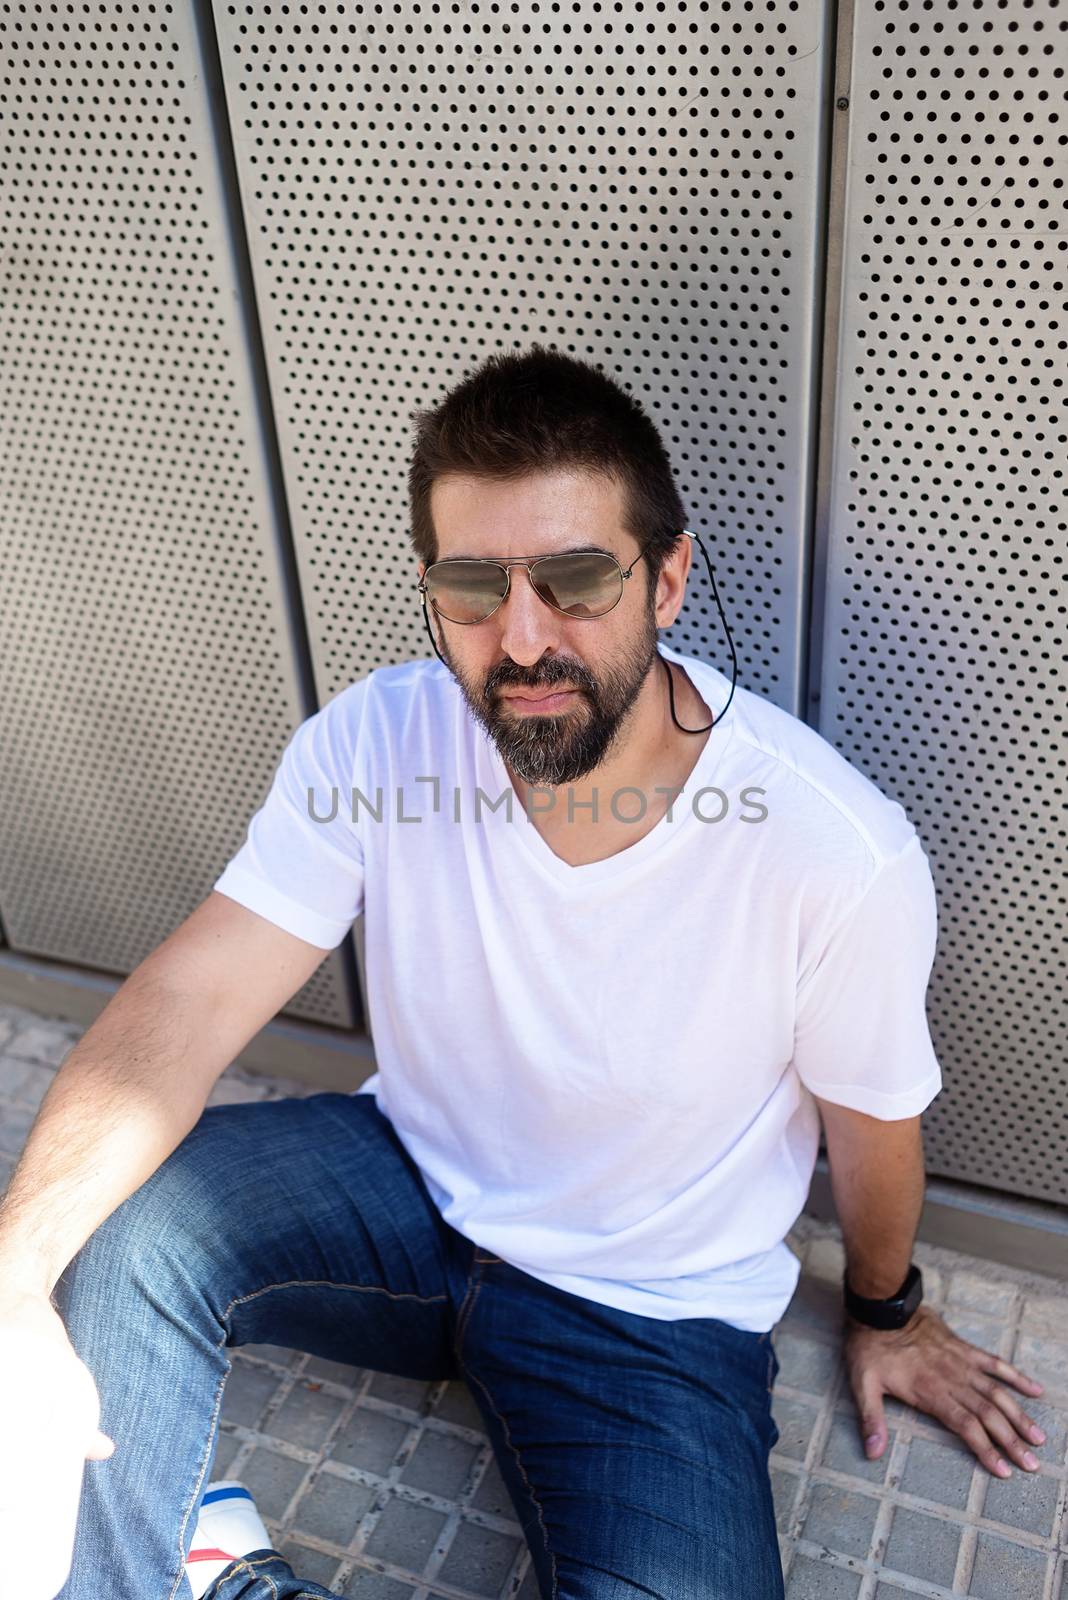 Bearded guy with sunglasses sitting on ground outdoors